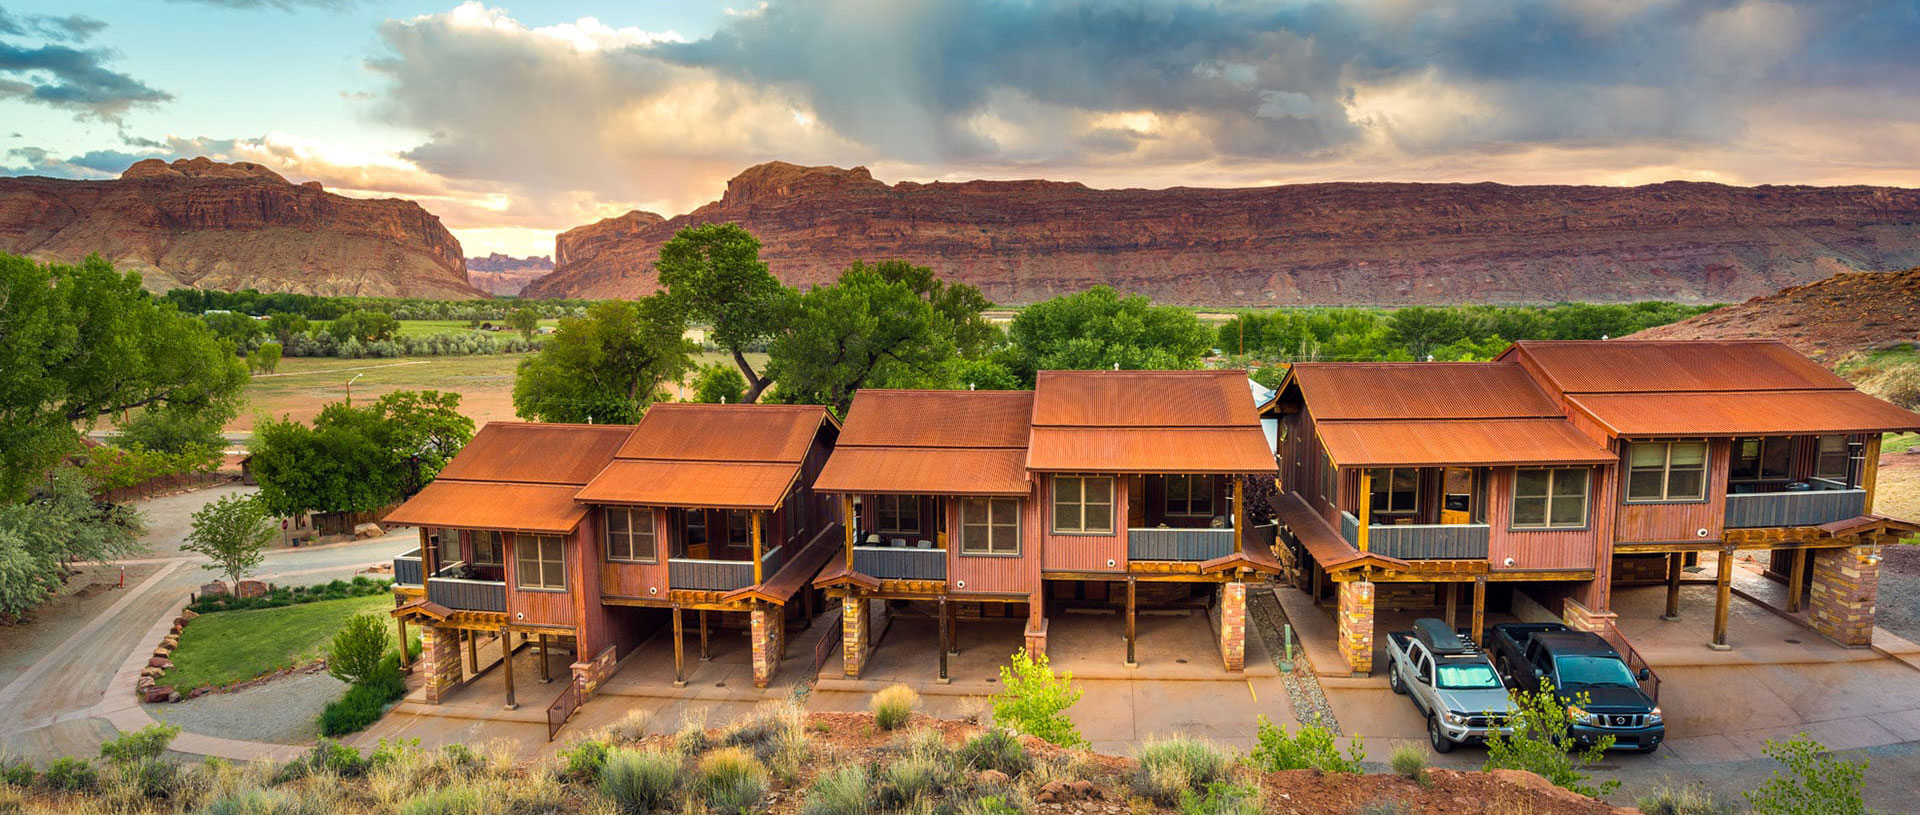 Six brown bungalow units at Moab Springs Ranch stand in a row side by side against a backdrop of lush green cottonwood trees and copper brown ragged cliffs.